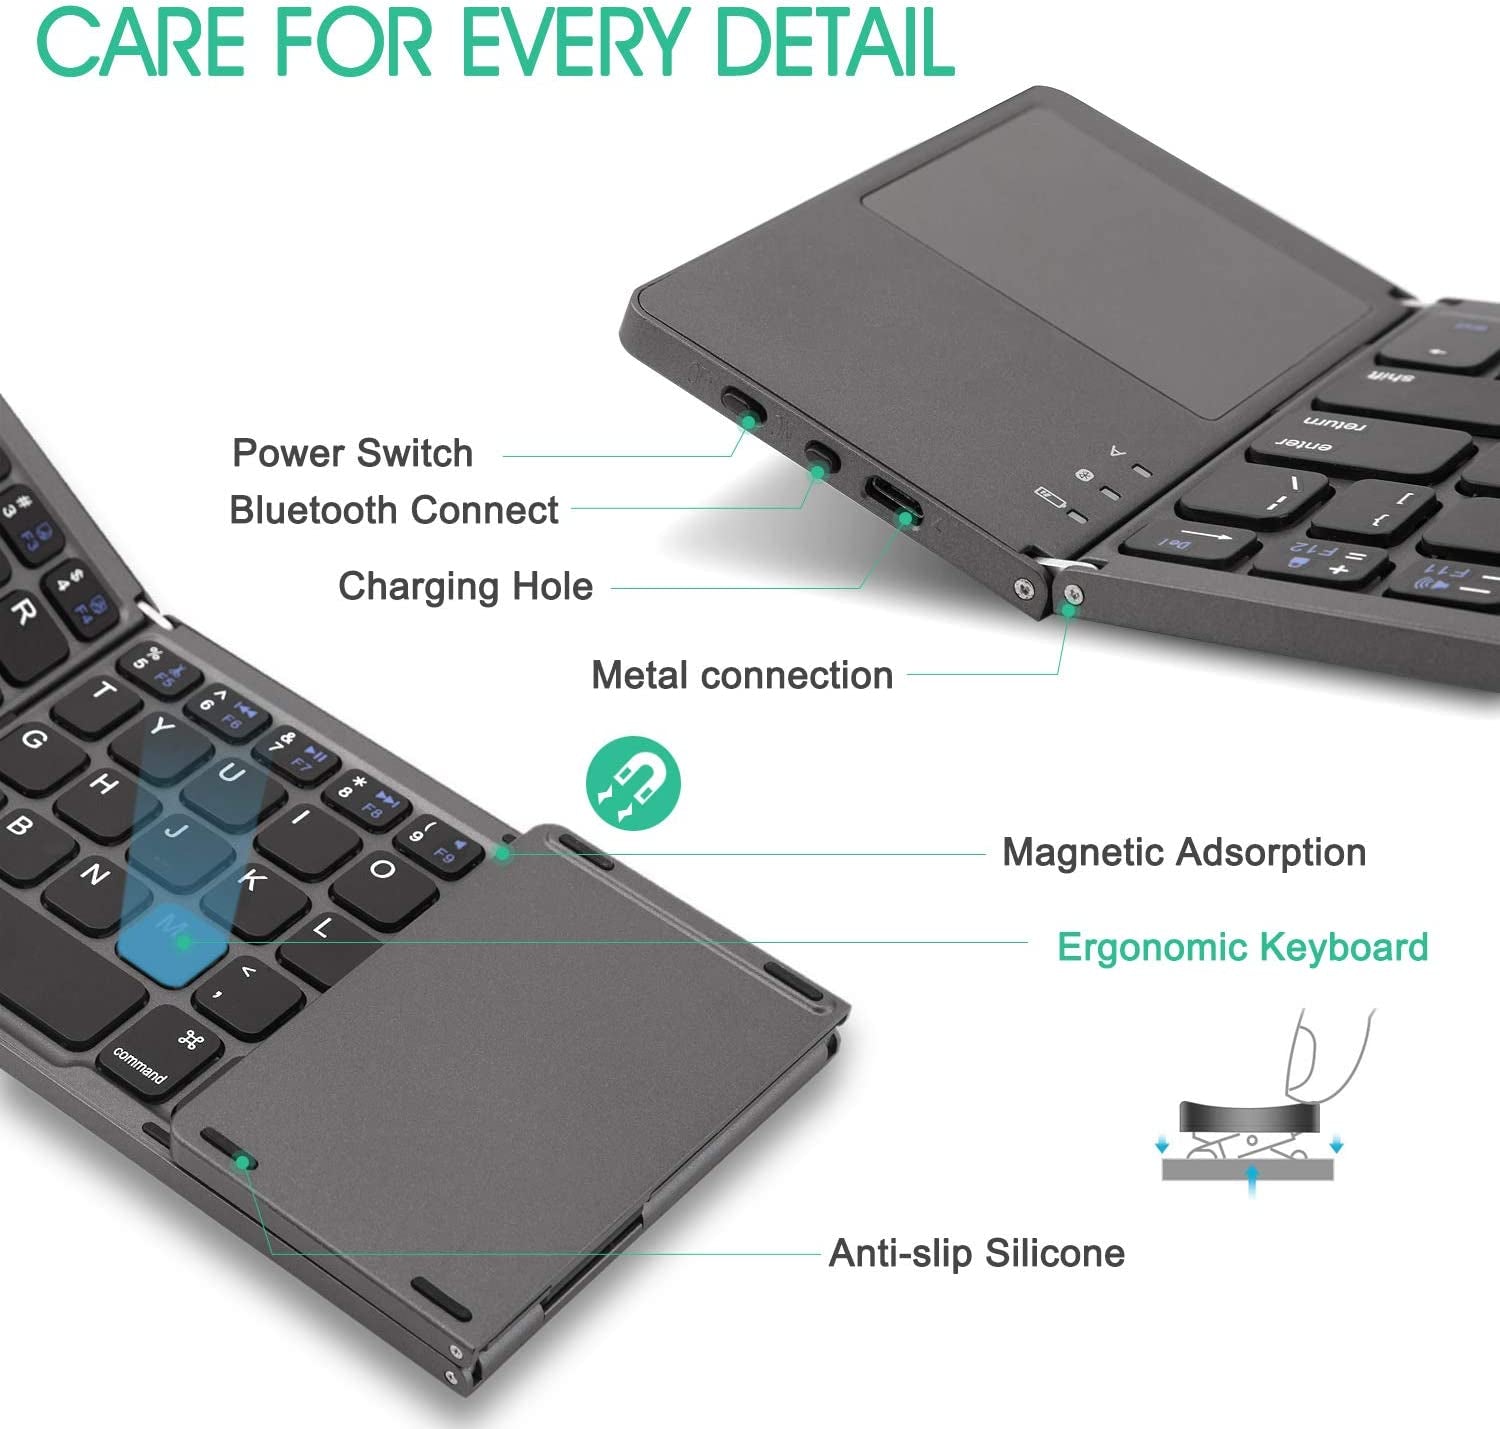 Foldable Bluetooth Keyboard with Touchpad -  Portable Wireless Keyboard with Stand Holder, Rechargeable Full Size Ultra Slim Pocket Folding Keyboard for Android Windows IOS Tablet & Laptop-Gray